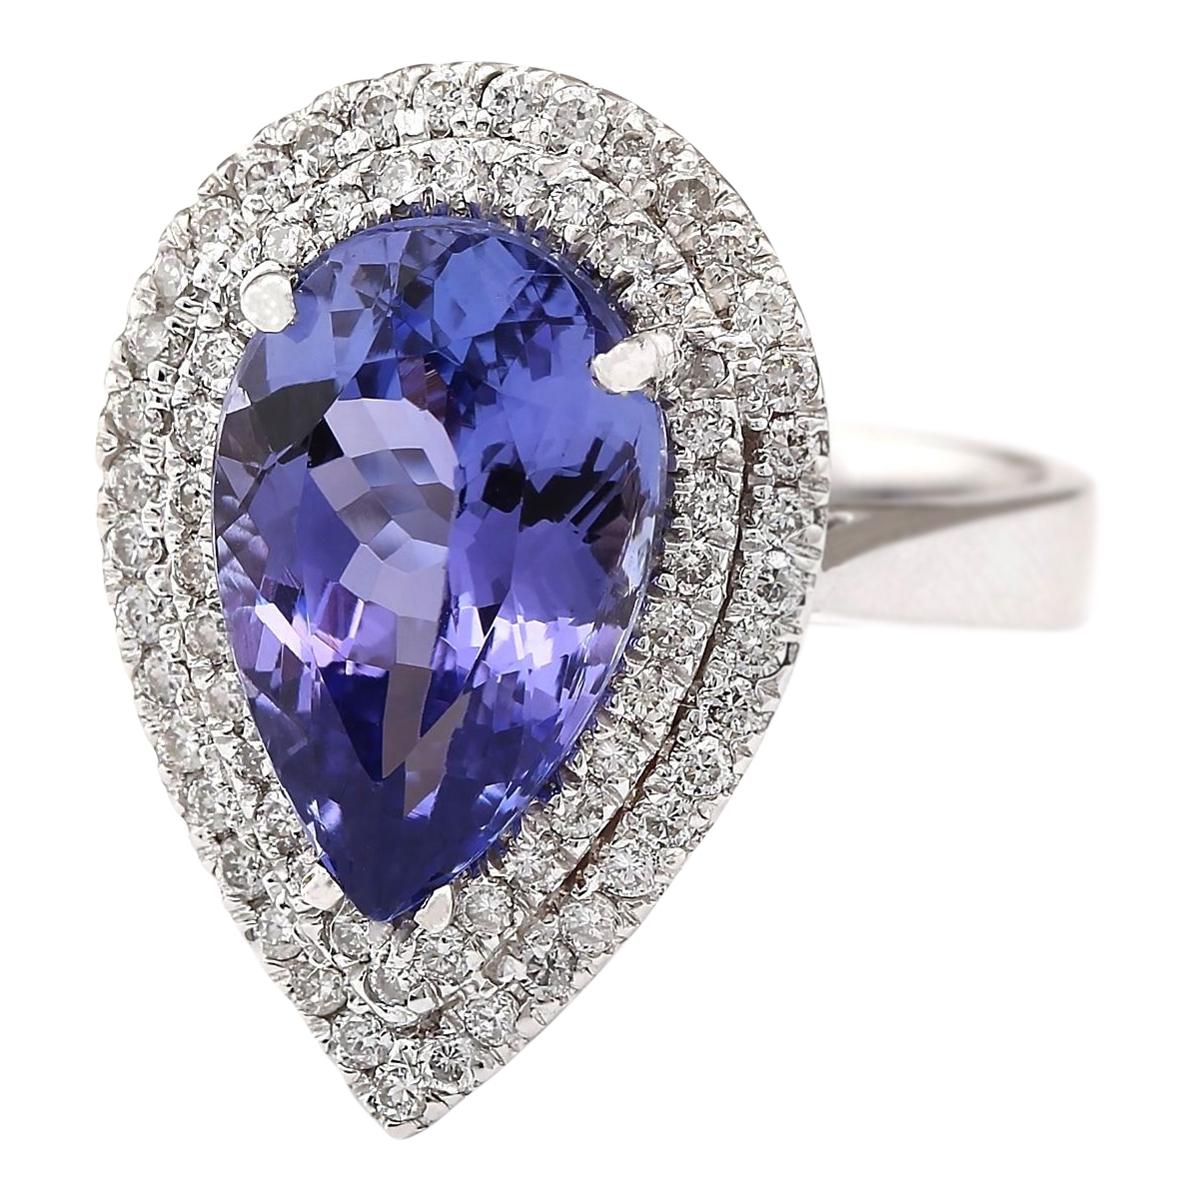 Stamped: 14K White Gold
Total Ring Weight: 7.5 Grams
Total Natural Tanzanite Weight is 5.53 Carat (Measures: 14.00x10.00 mm)
Total Natural Diamond Weight is 0.75 Carat
Color: F-G, Clarity: VS2-SI1
Face Measures: 22.30x15.65 mm
Sku: [704045W]